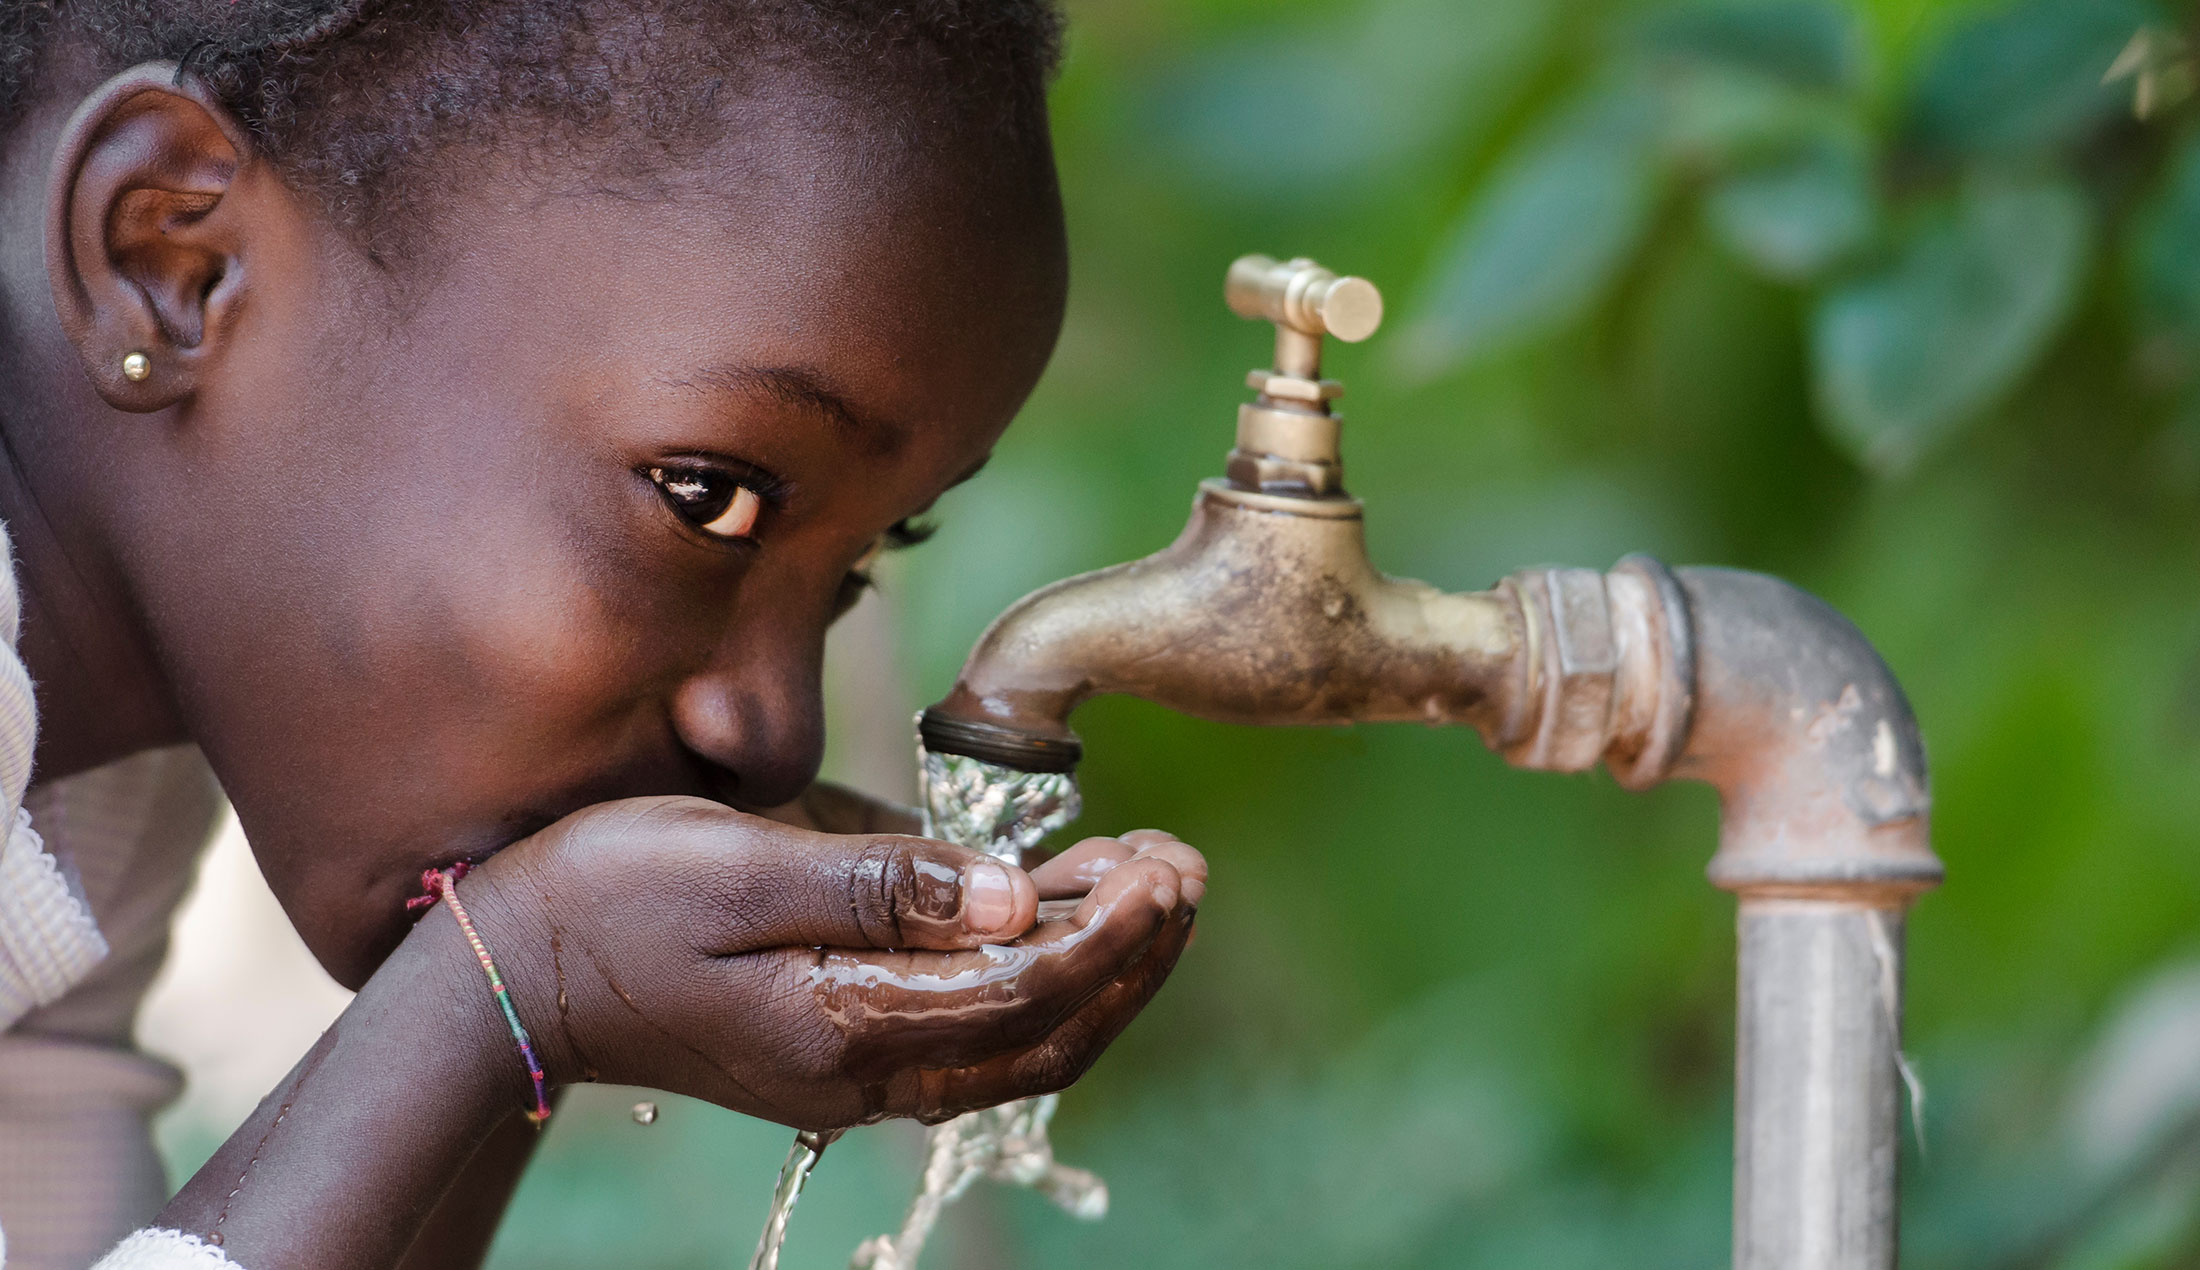 A child in Africa drinks water from a tap outdoors